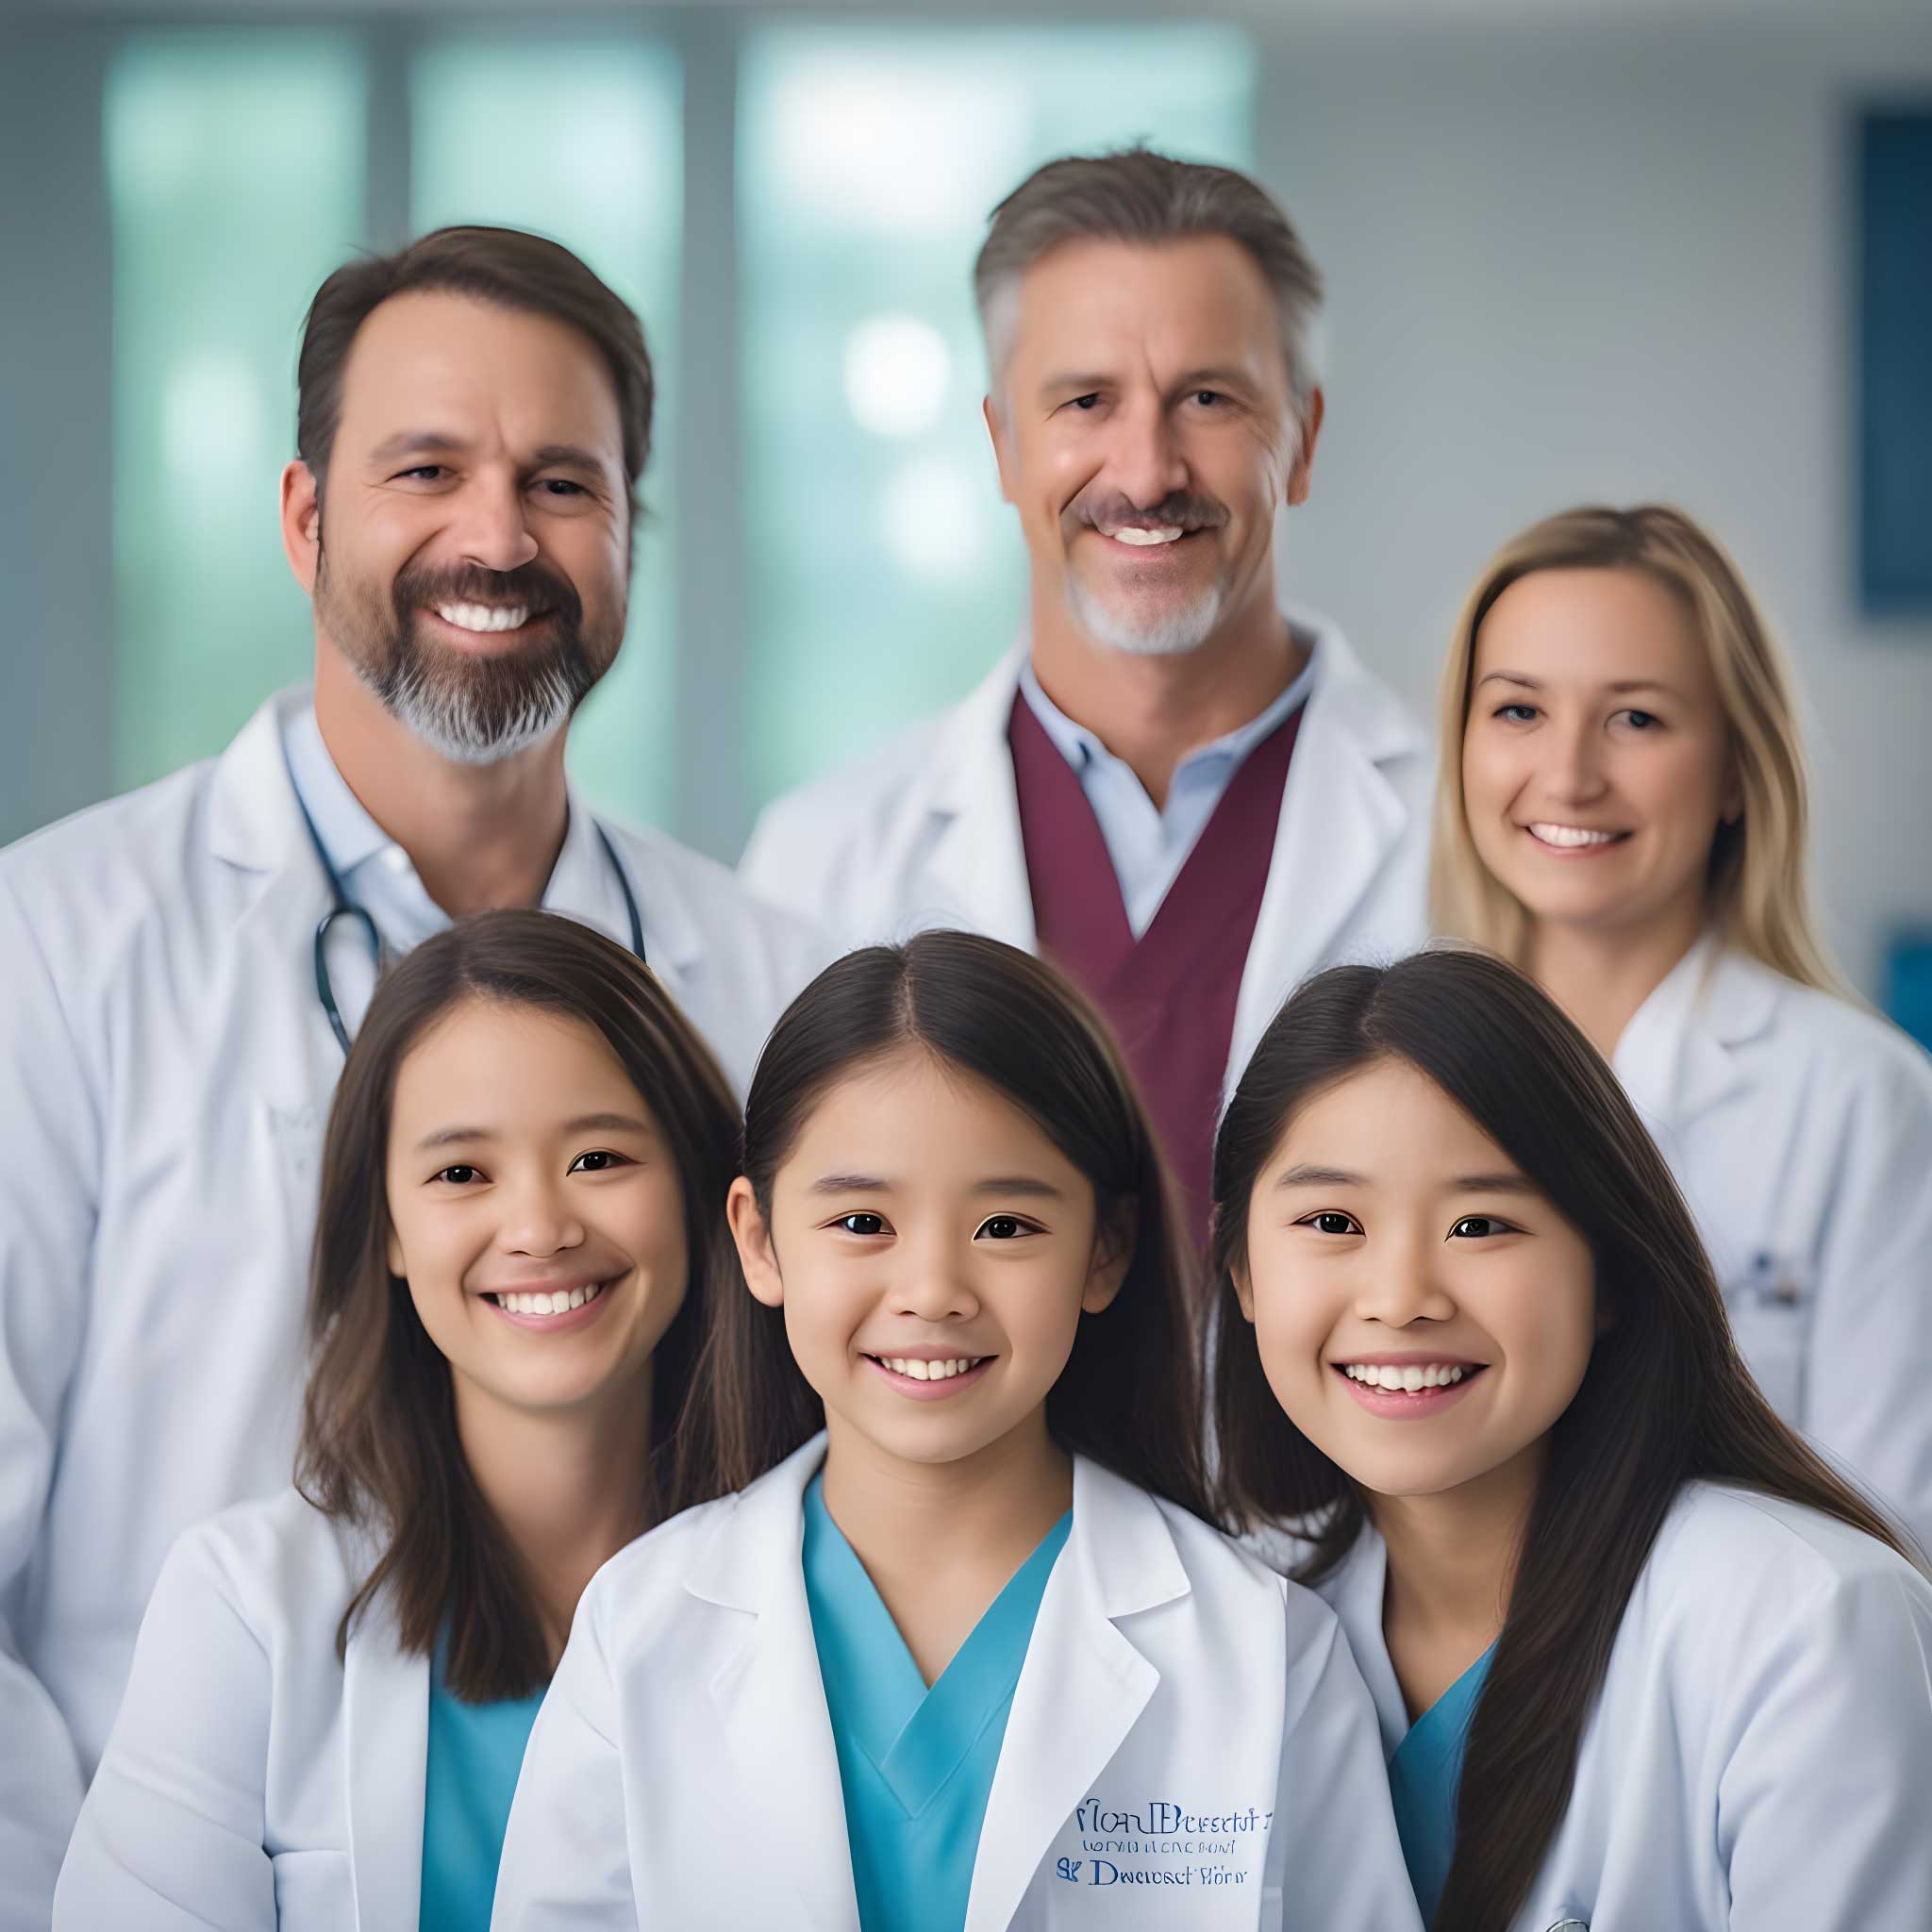 Our Team – Meet the Skilled and Compassionate Dental Professionals at Wren Pediatric Dentistry